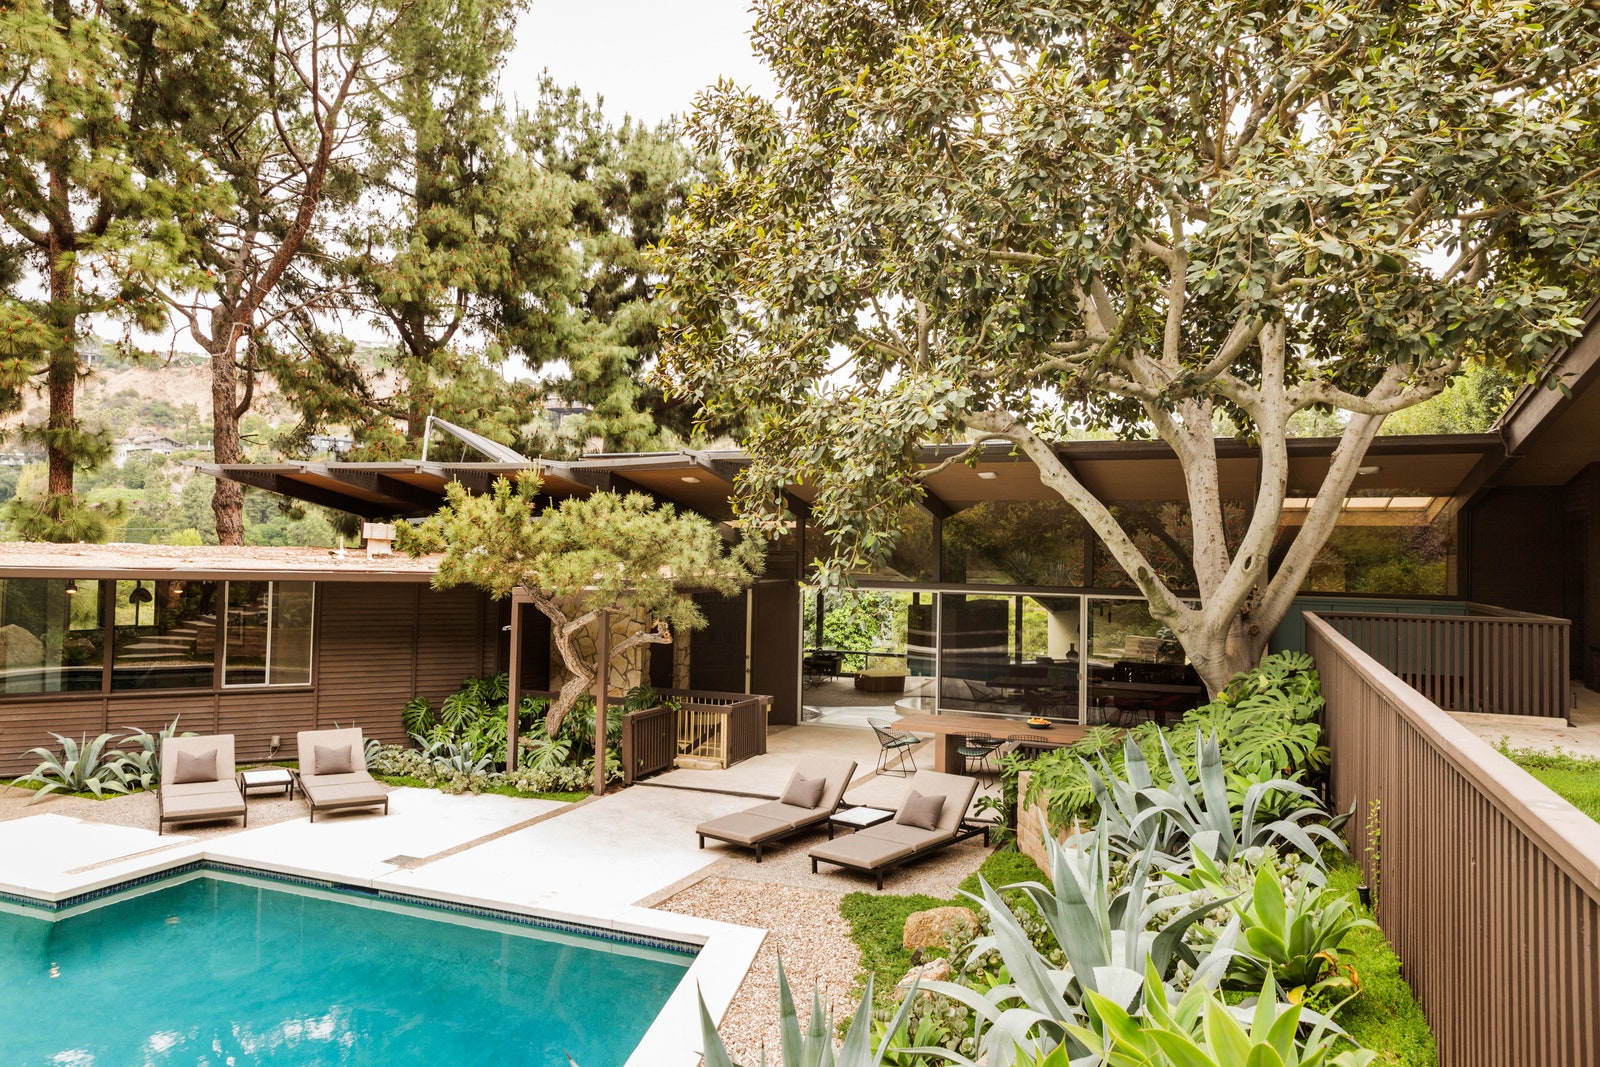 Inside Actress Robin Tunney’s Home